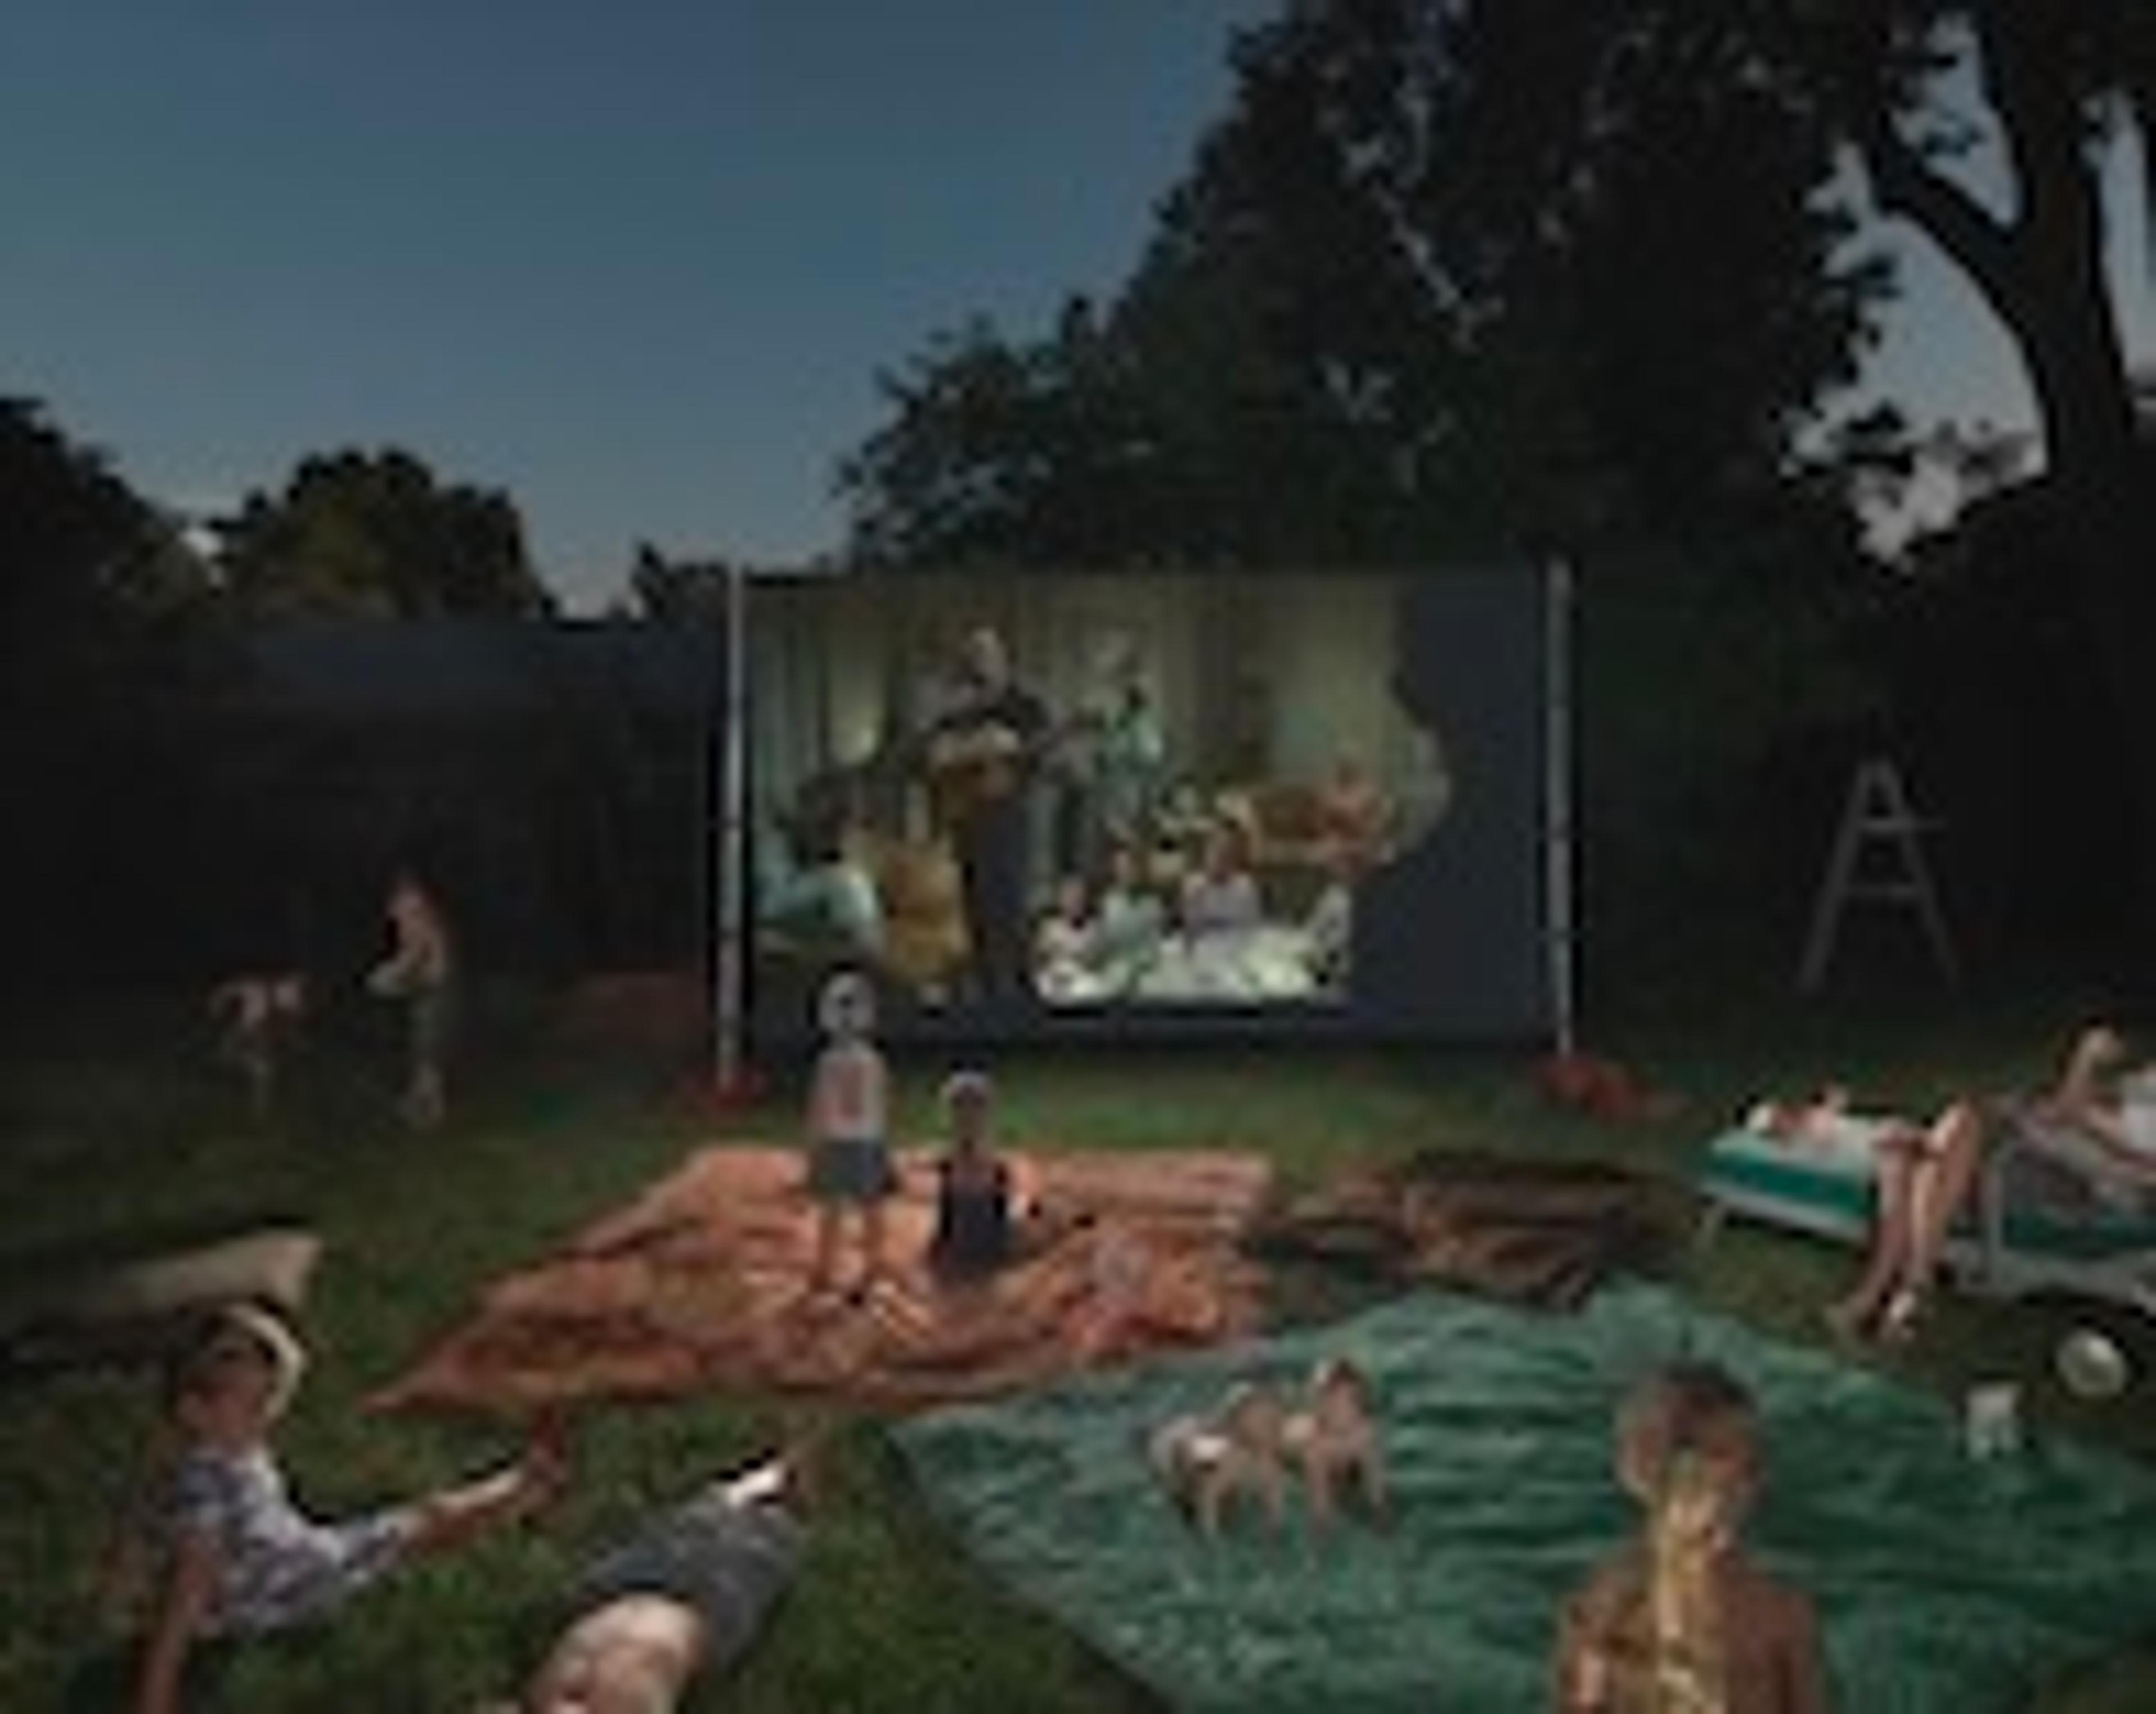 A photograph of several children viewing a movie projected on a screen outdoors